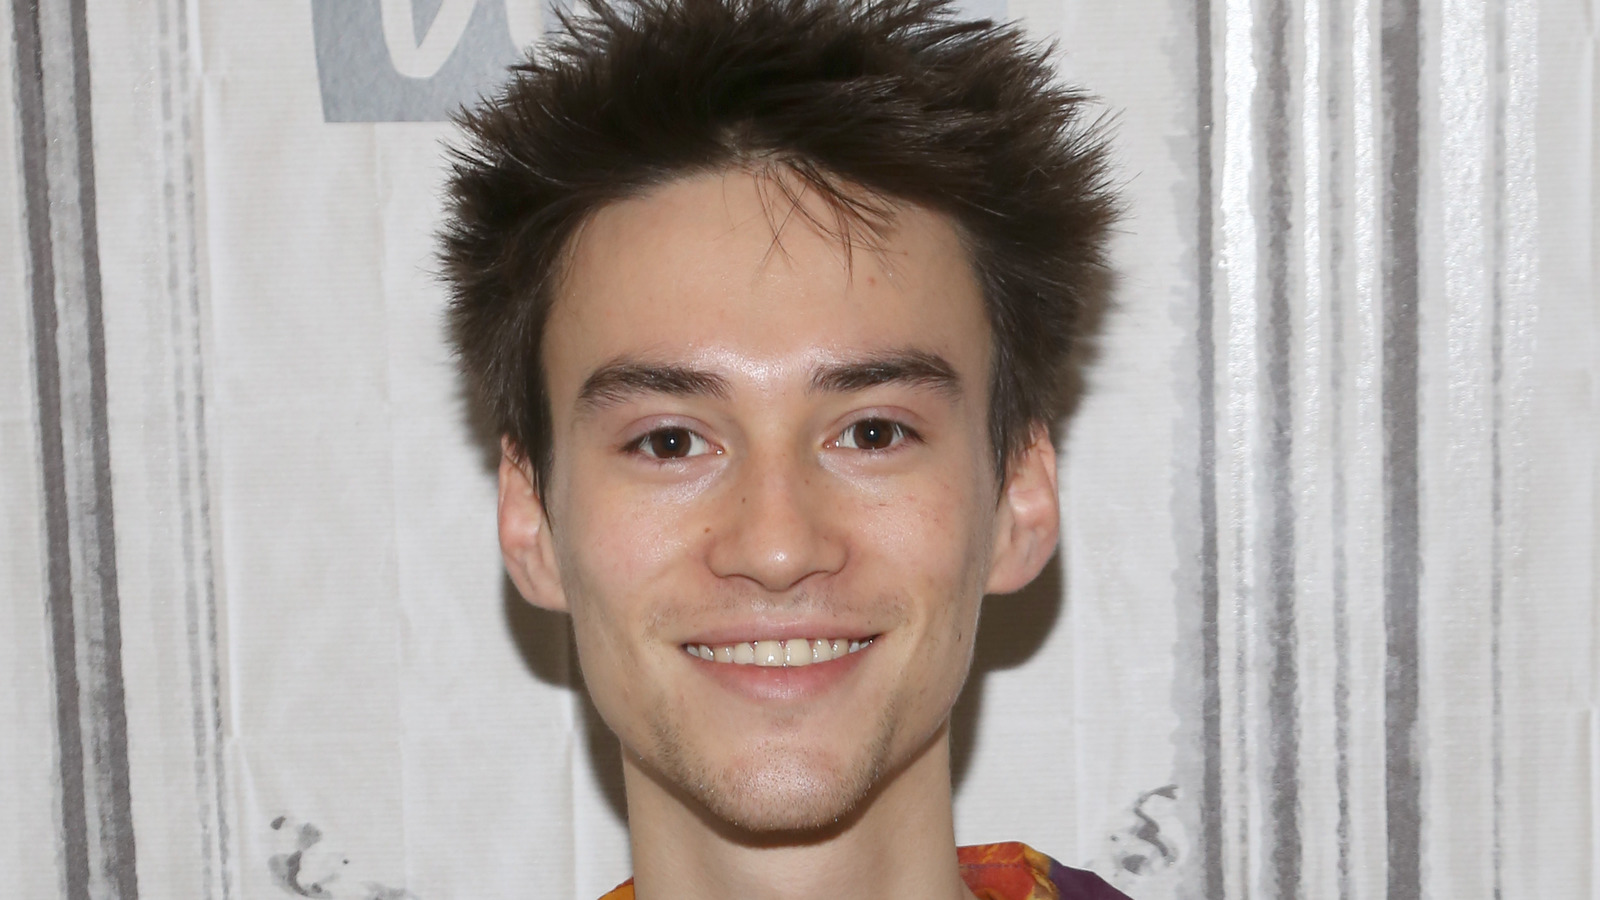 You Might Never Guess That Jacob Collier Was a Genius - The New